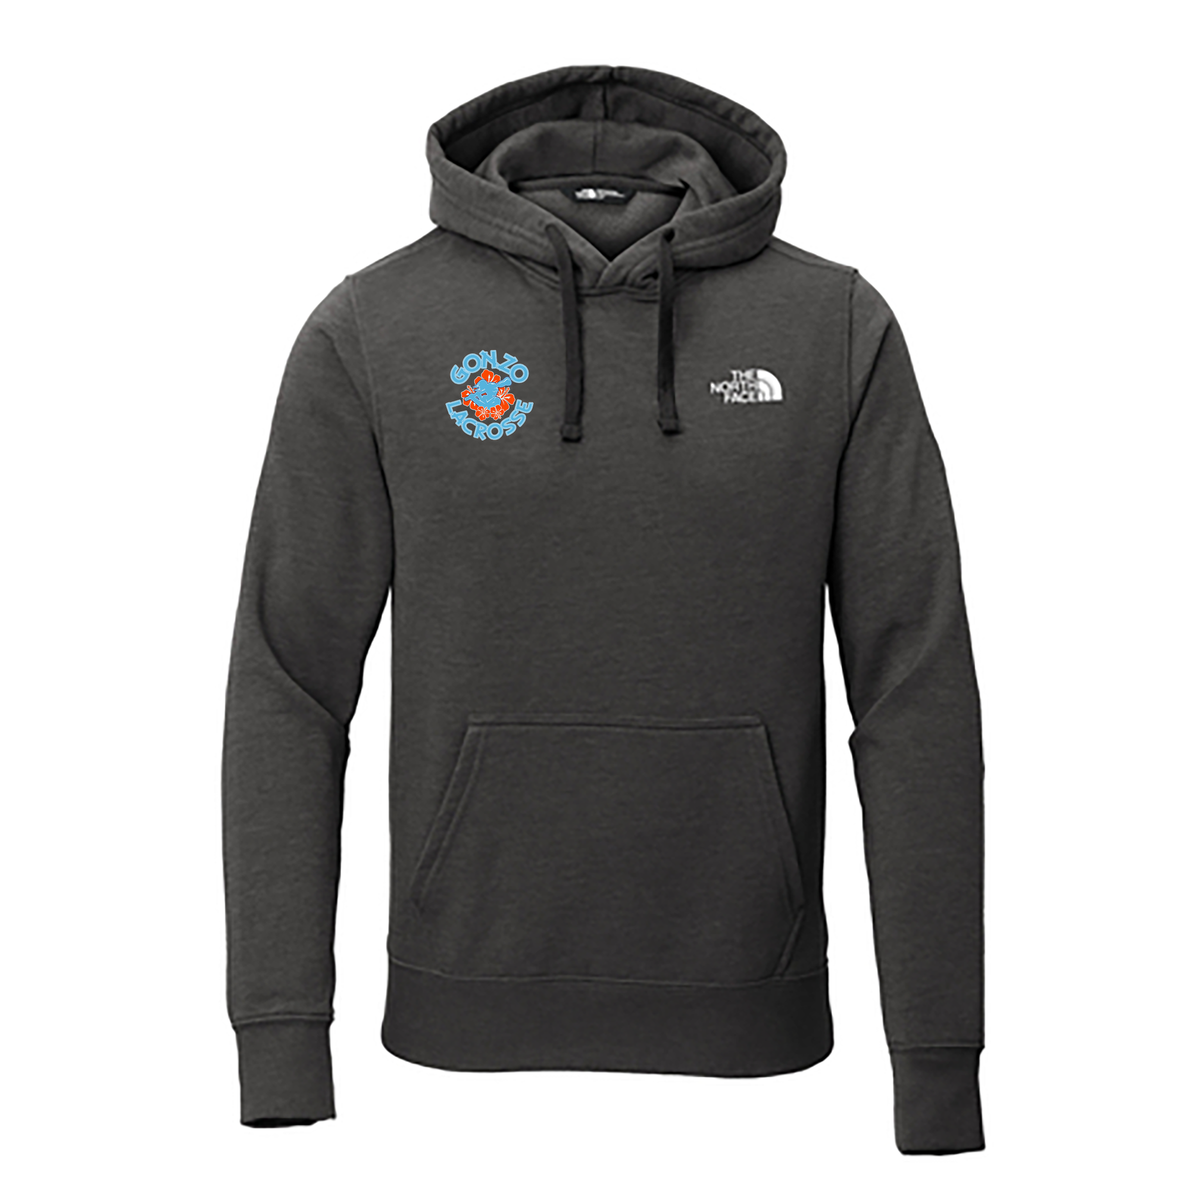 Gonzo Girls Lacrosse The North Face Pullover Hoodie